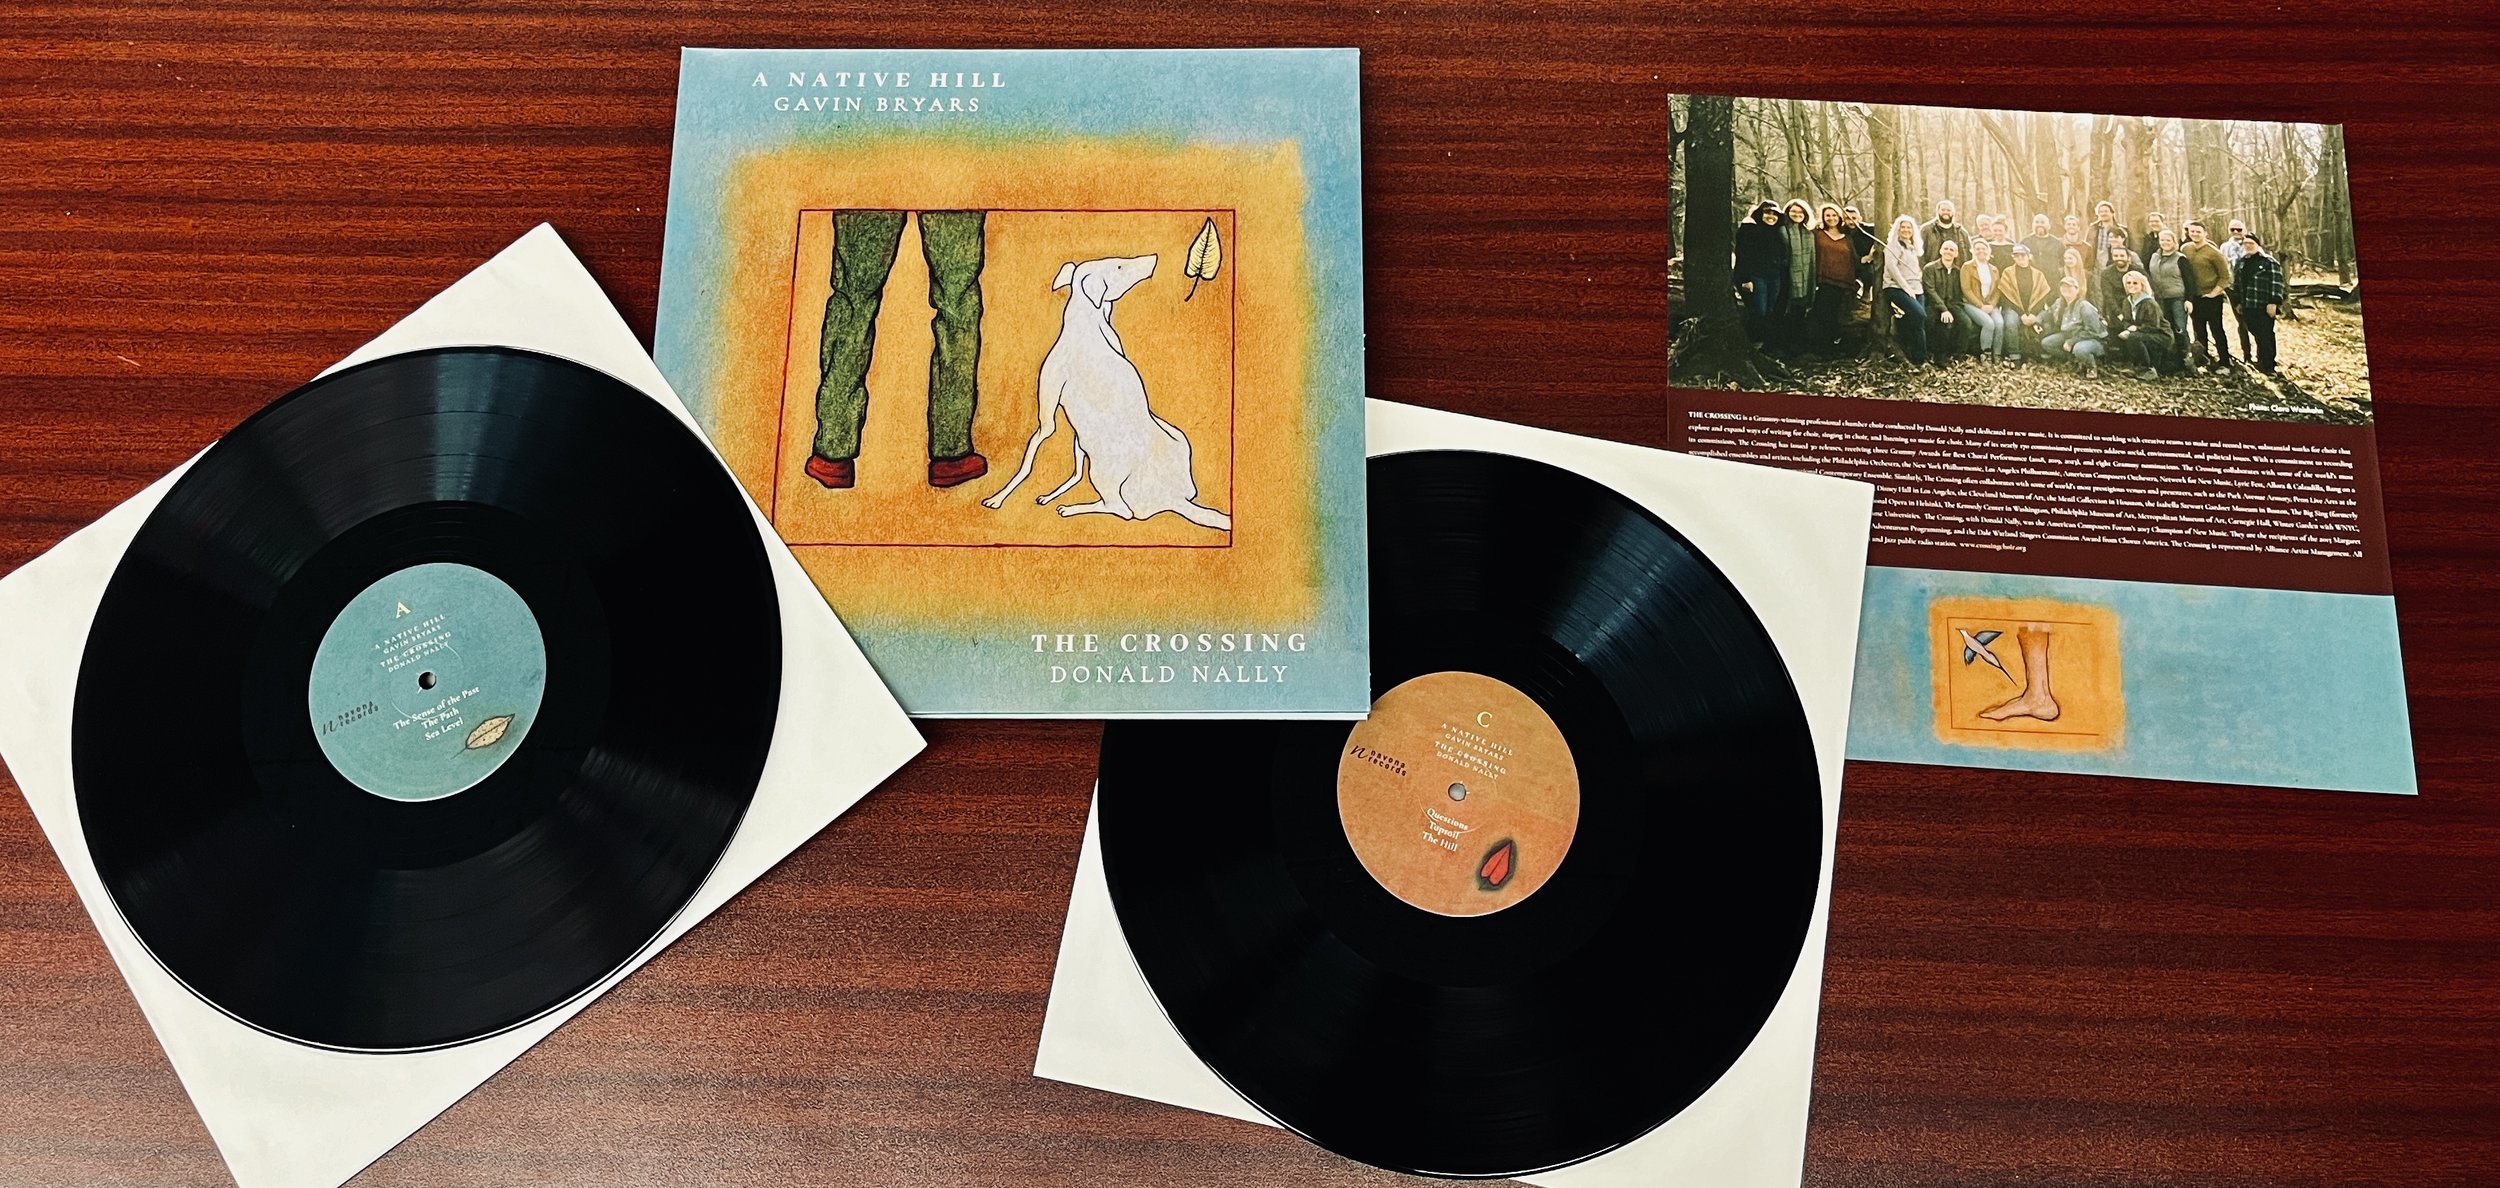 A Native Hill – our first Vinyl! 